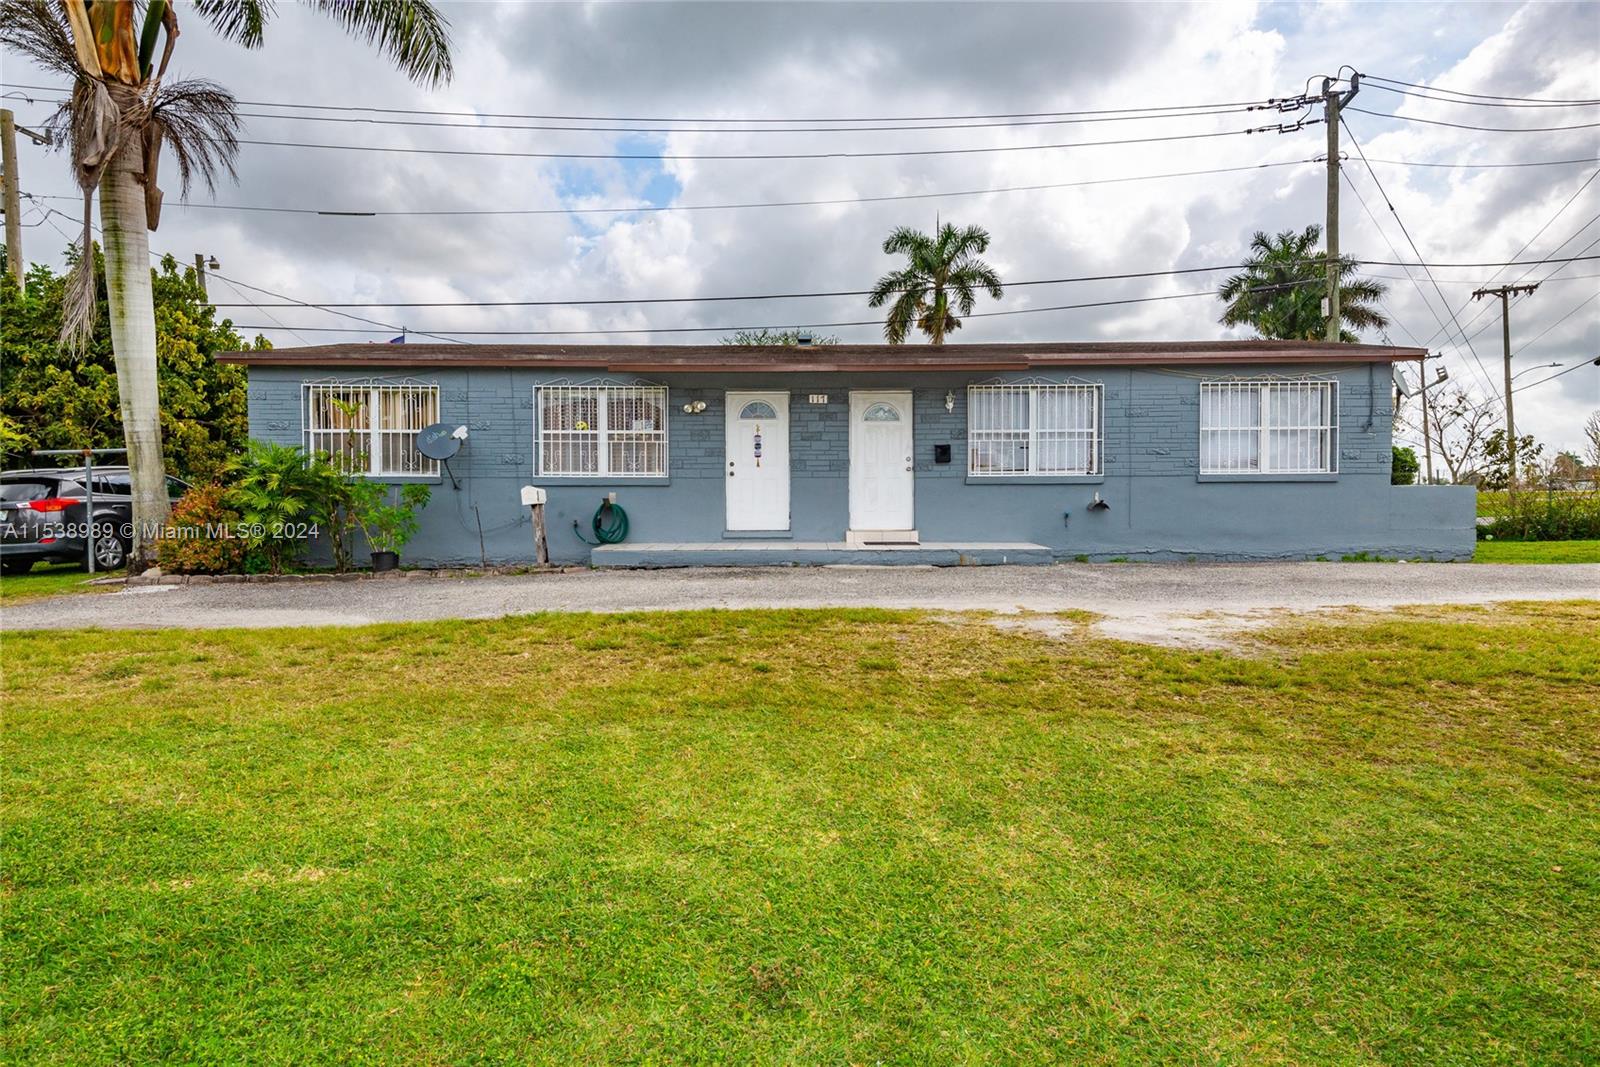 Rental Property at 117 E Canal St N St, Belle Glade, Palm Beach County, Florida -  - $295,000 MO.